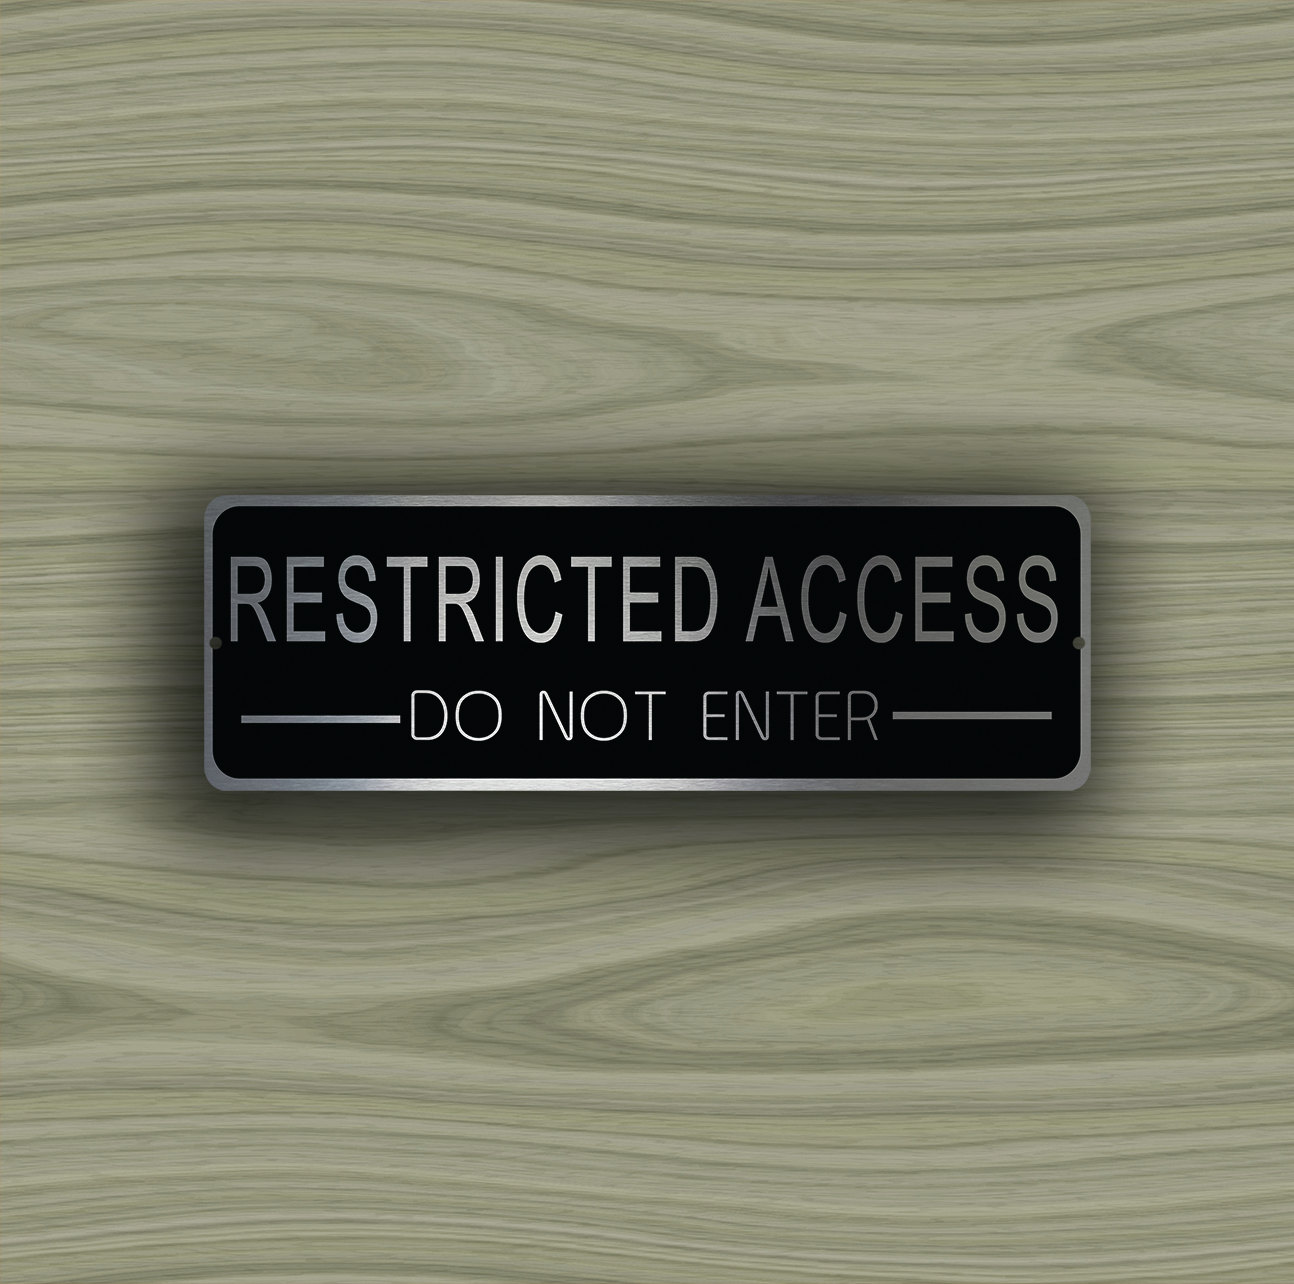 RESTRICTED ACCESS SIGN